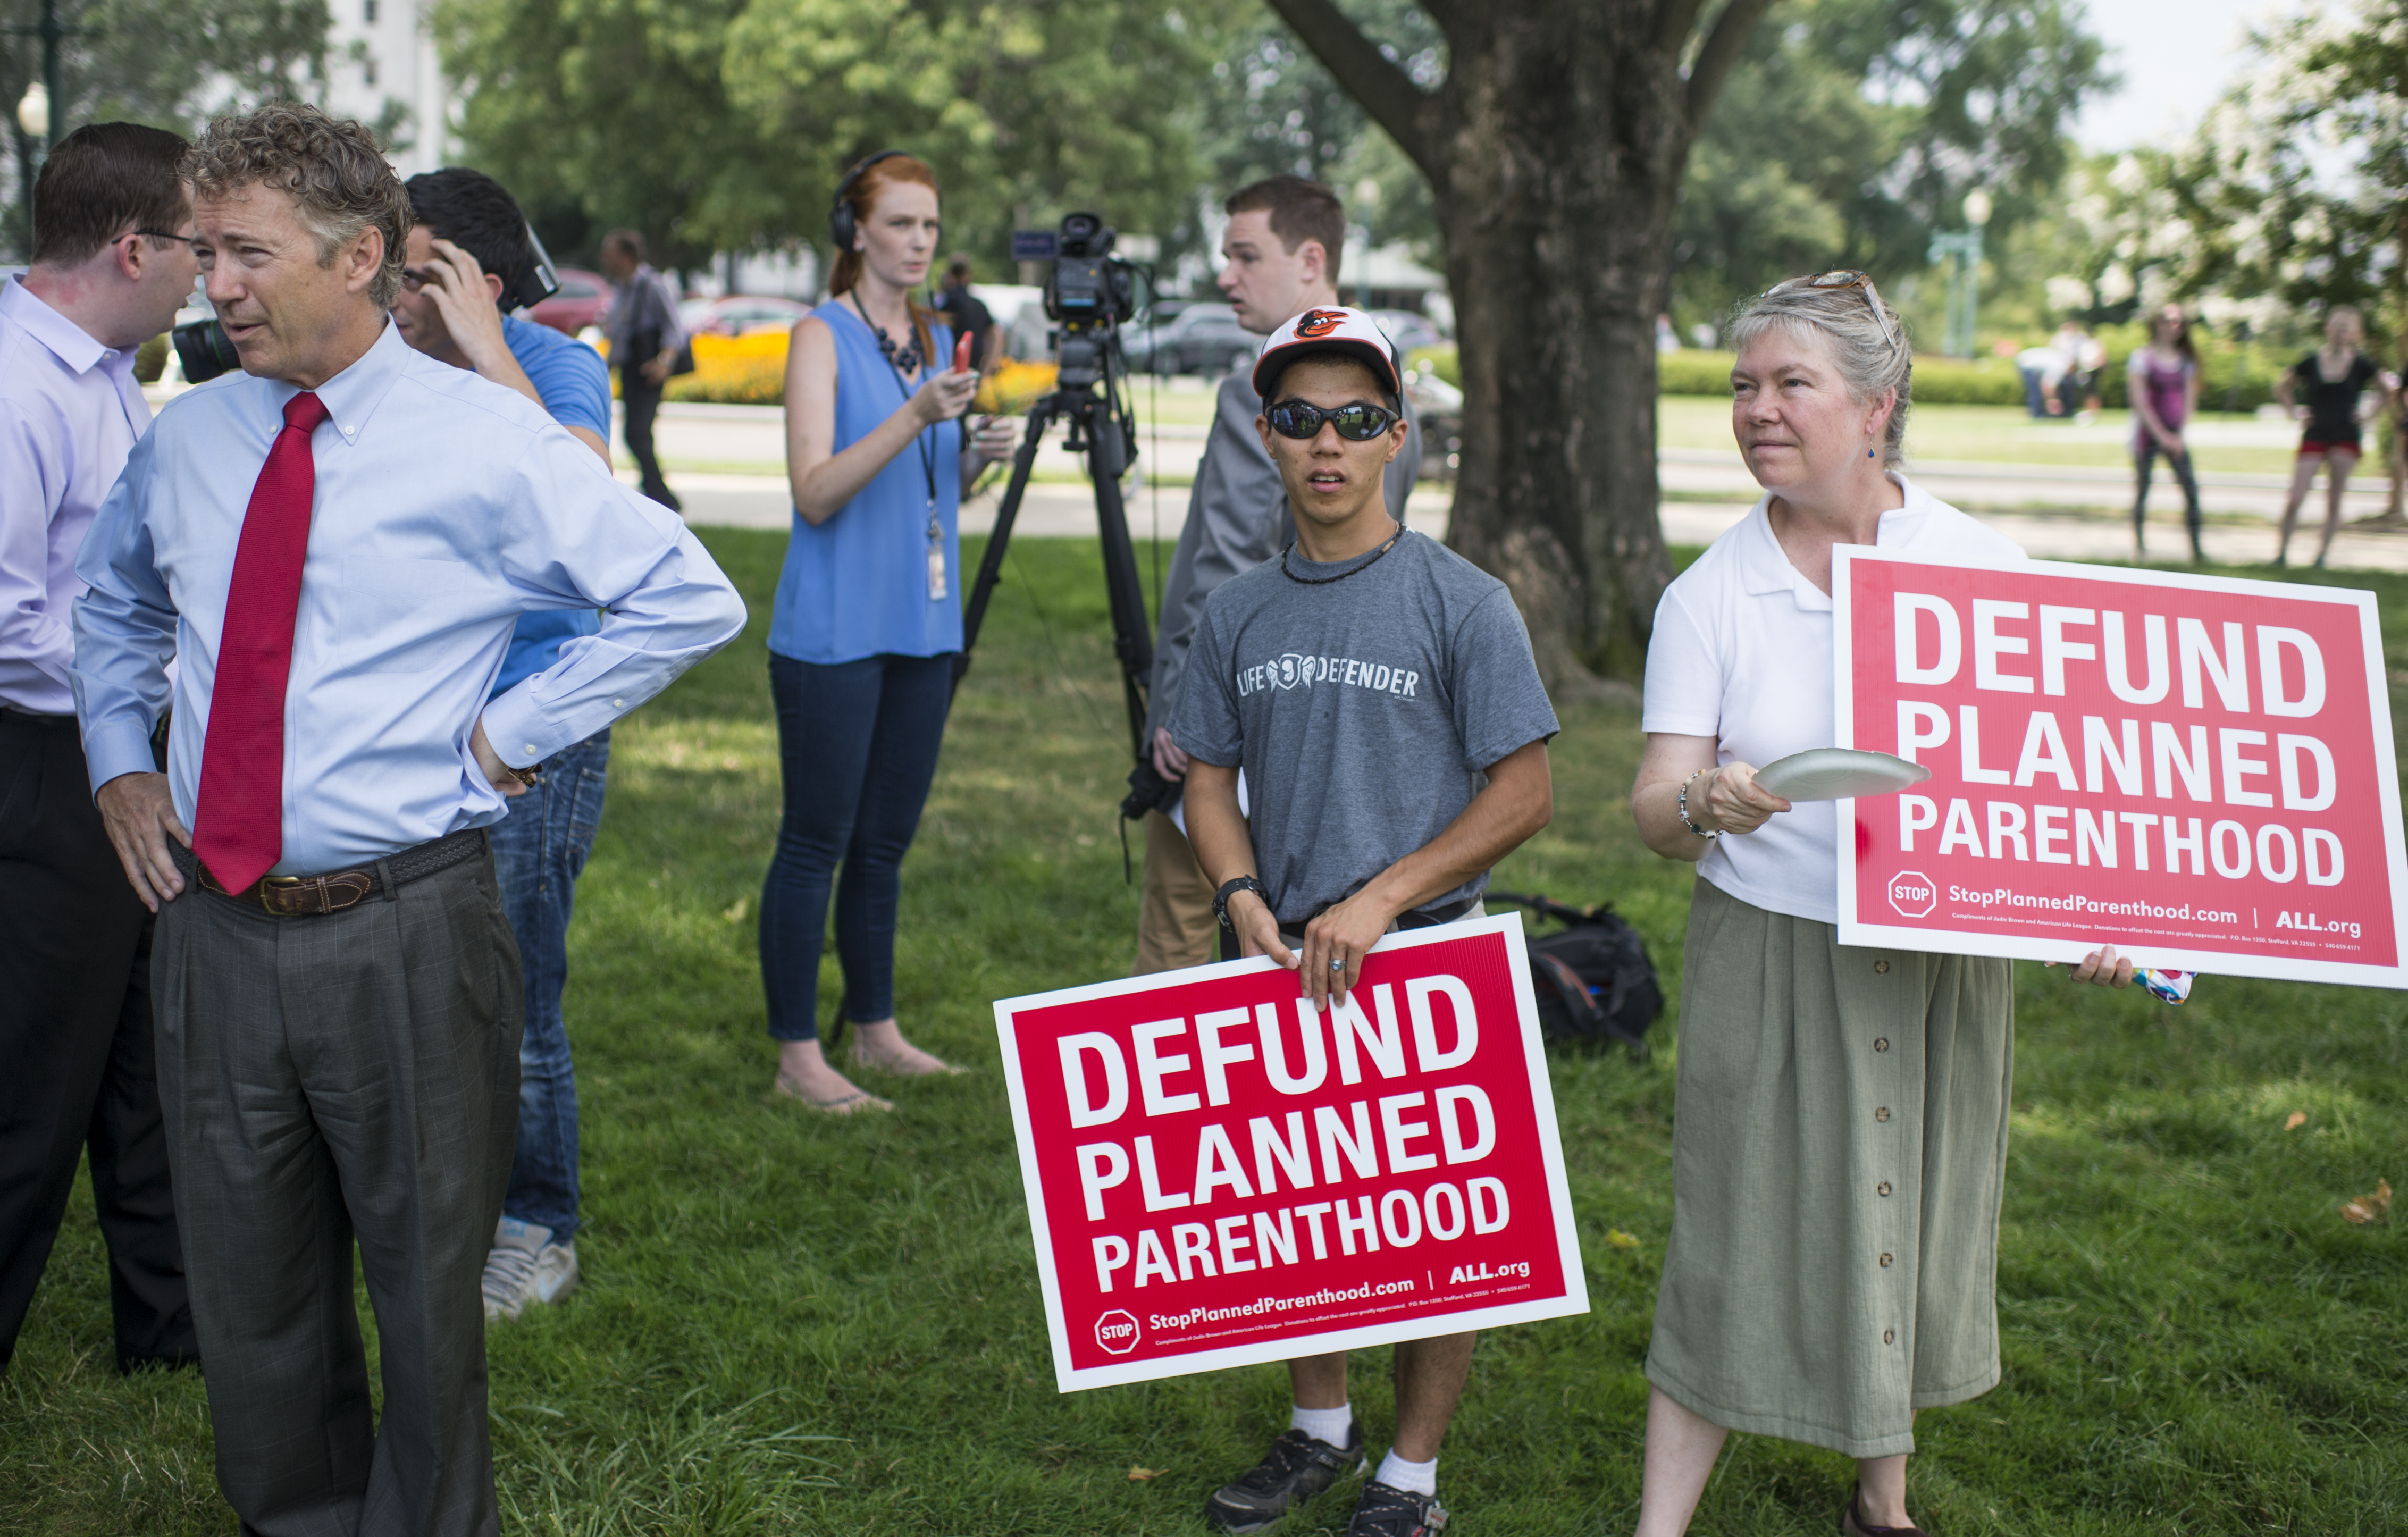 "Sen. Rand Paul, R-Ky., waits to speak at a mid-day rally outside the U.S. Capitol on Tuesday, July 28, 2015, in support of defunding Planned Parenthood. "